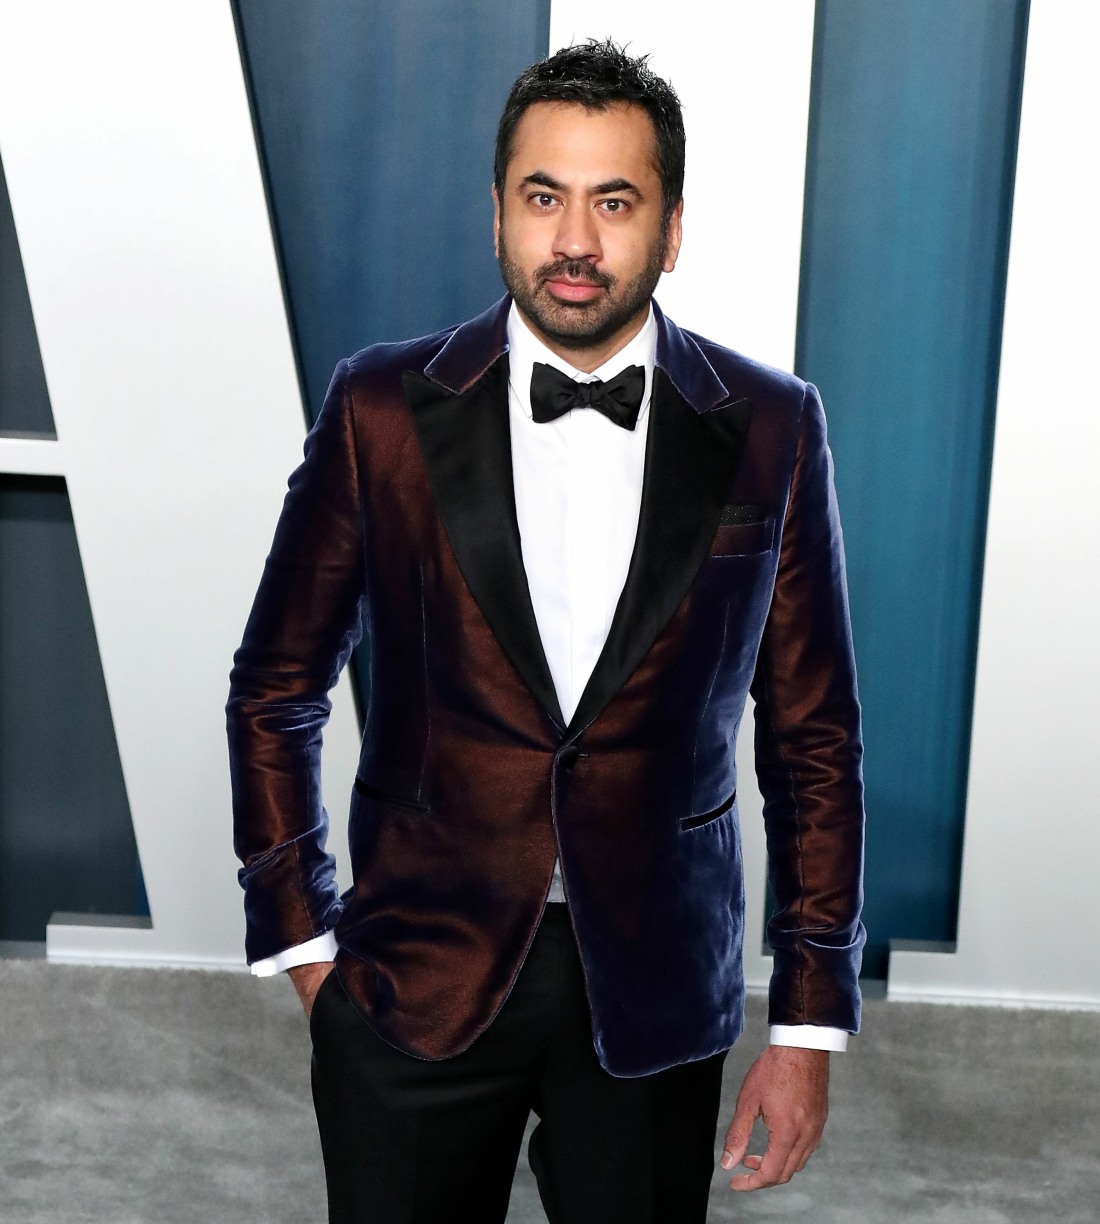 Kal Penn arrives at the 2020 Vanity Fair Oscar Party held at the Wallis Annenberg Center for the Per...